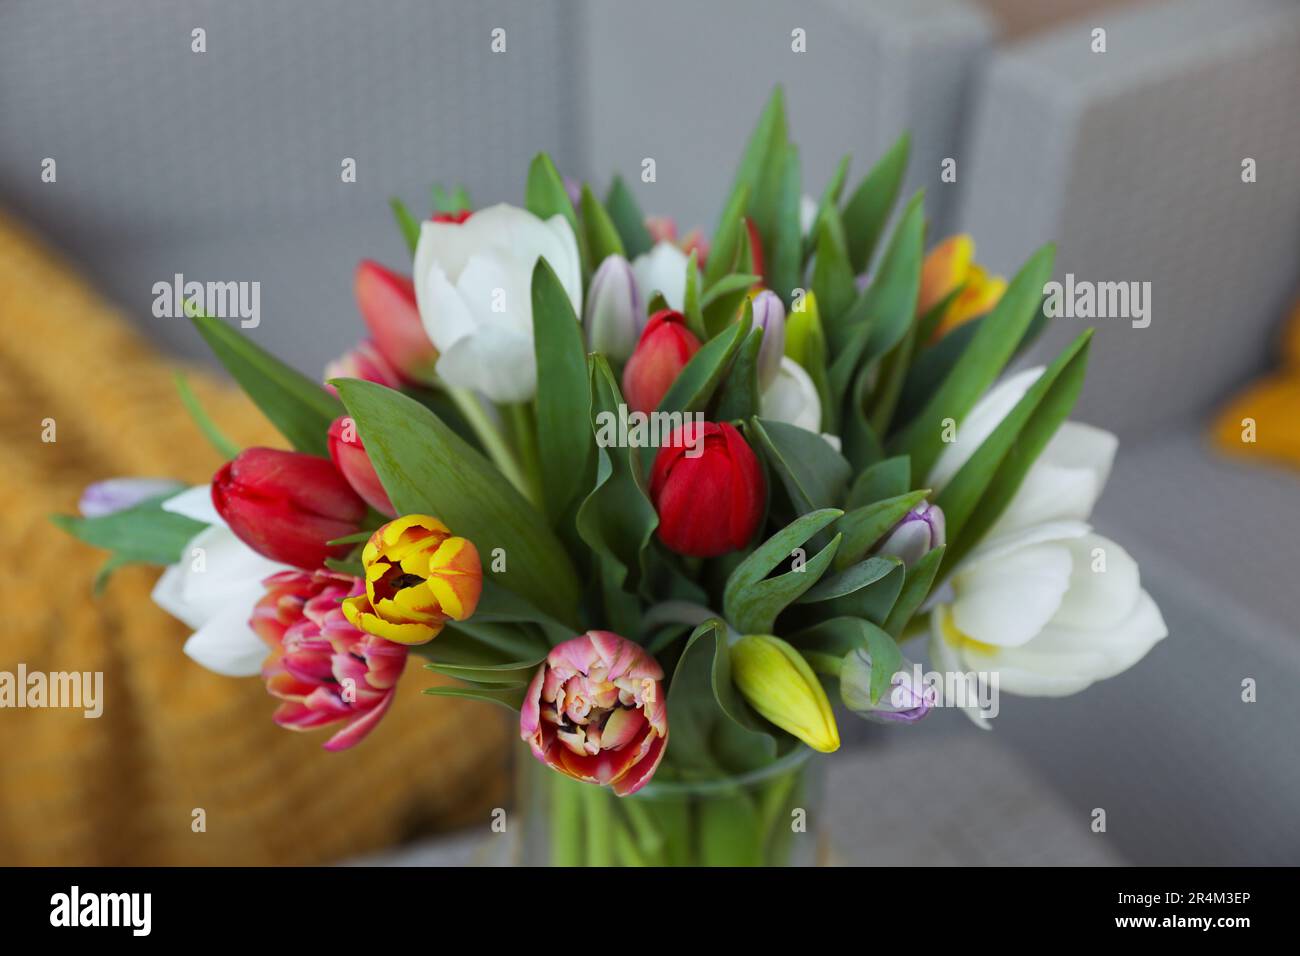 Beautiful bouquet of colorful tulips on blurred background, closeup view Stock Photo